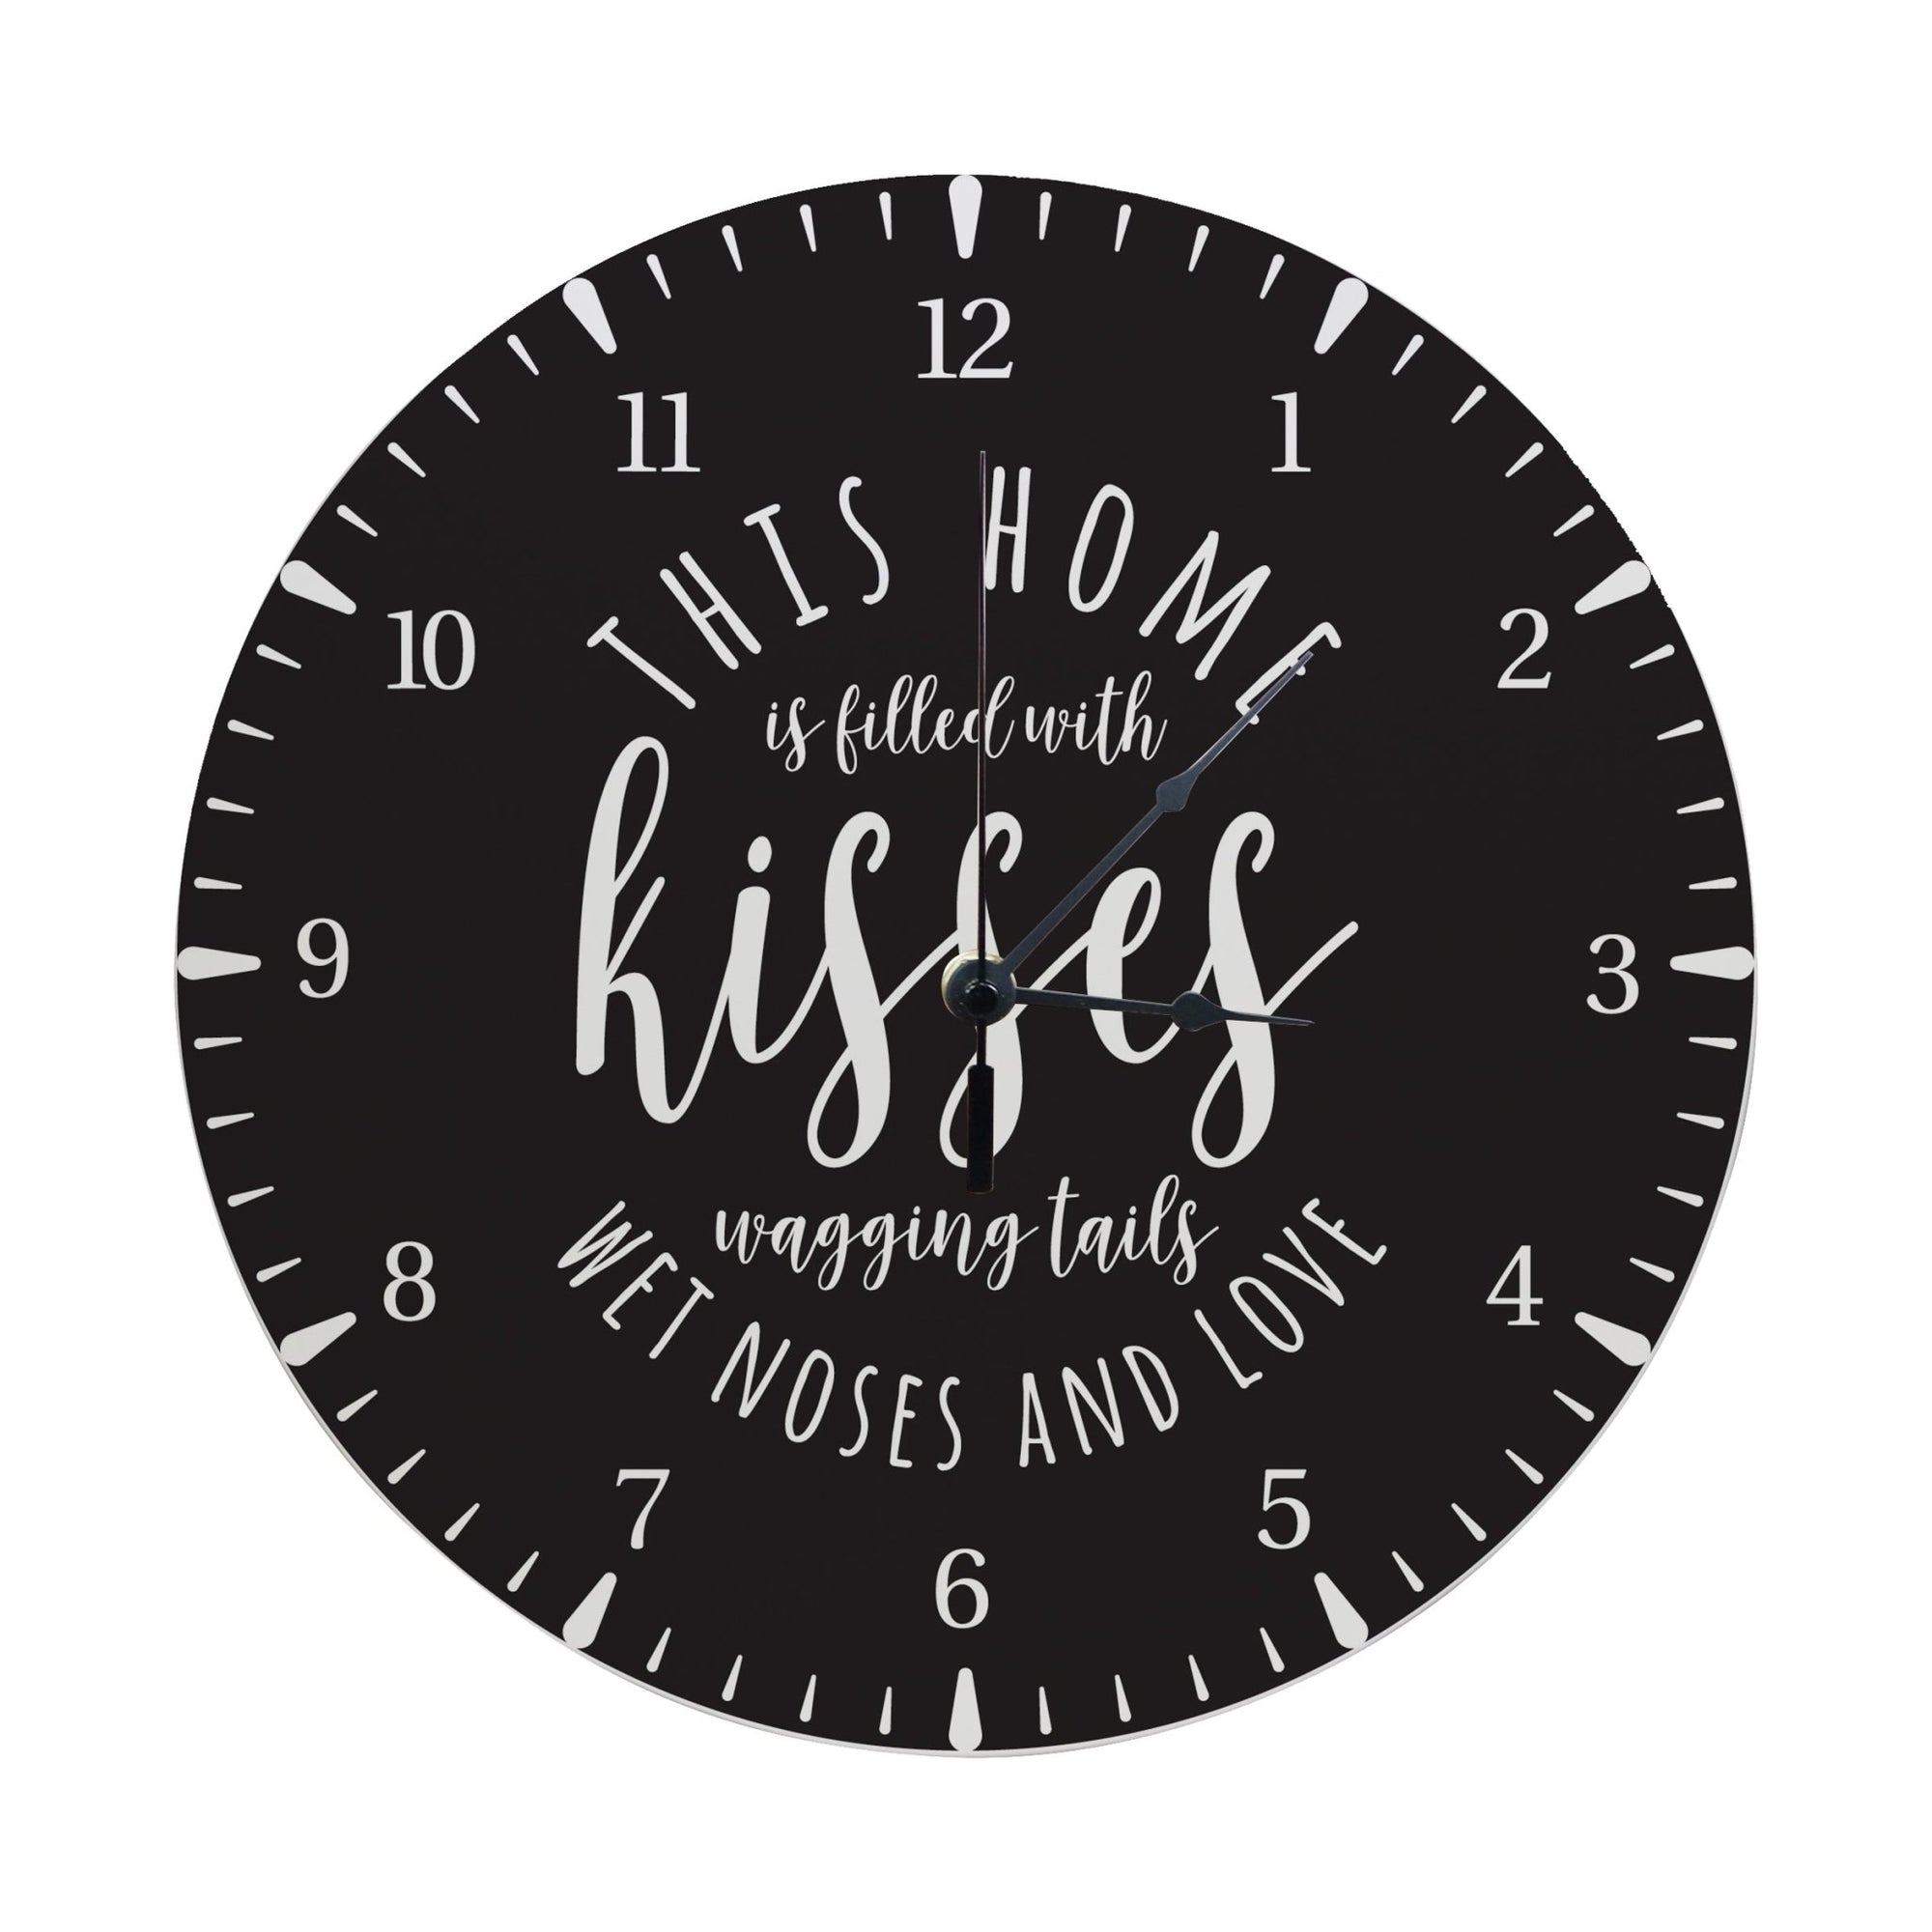 Minimalist Roman Numeral Wooden Clock For Walls Or Countertop Display For Pet Owners - This Home Is Filled With Kisses - LifeSong Milestones